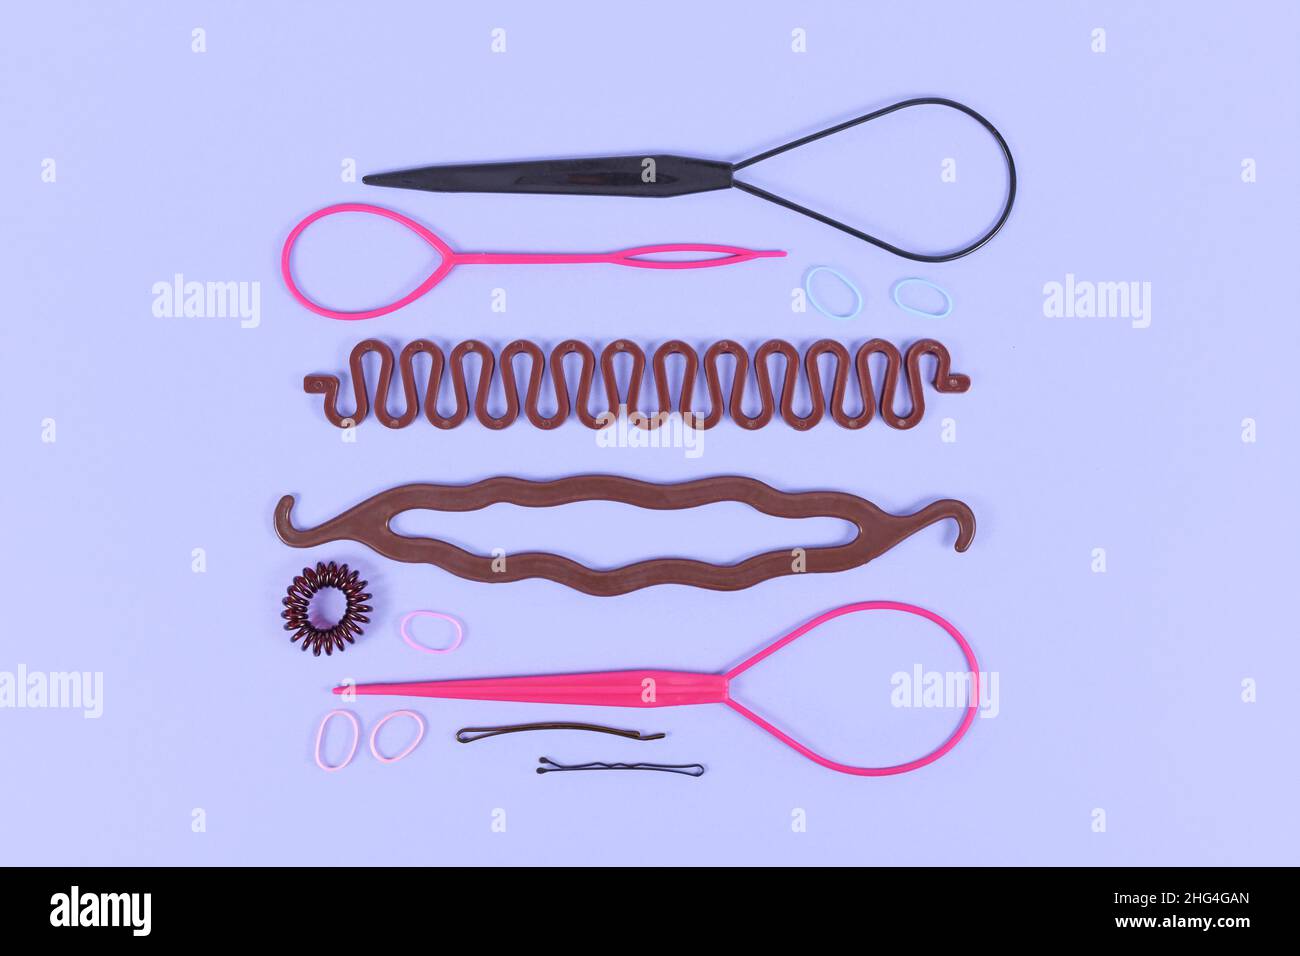 Various hair styling tools like bun maker, braid tool, ponytail style maker, hair clip, rubber bands and pins on violet background Stock Photo